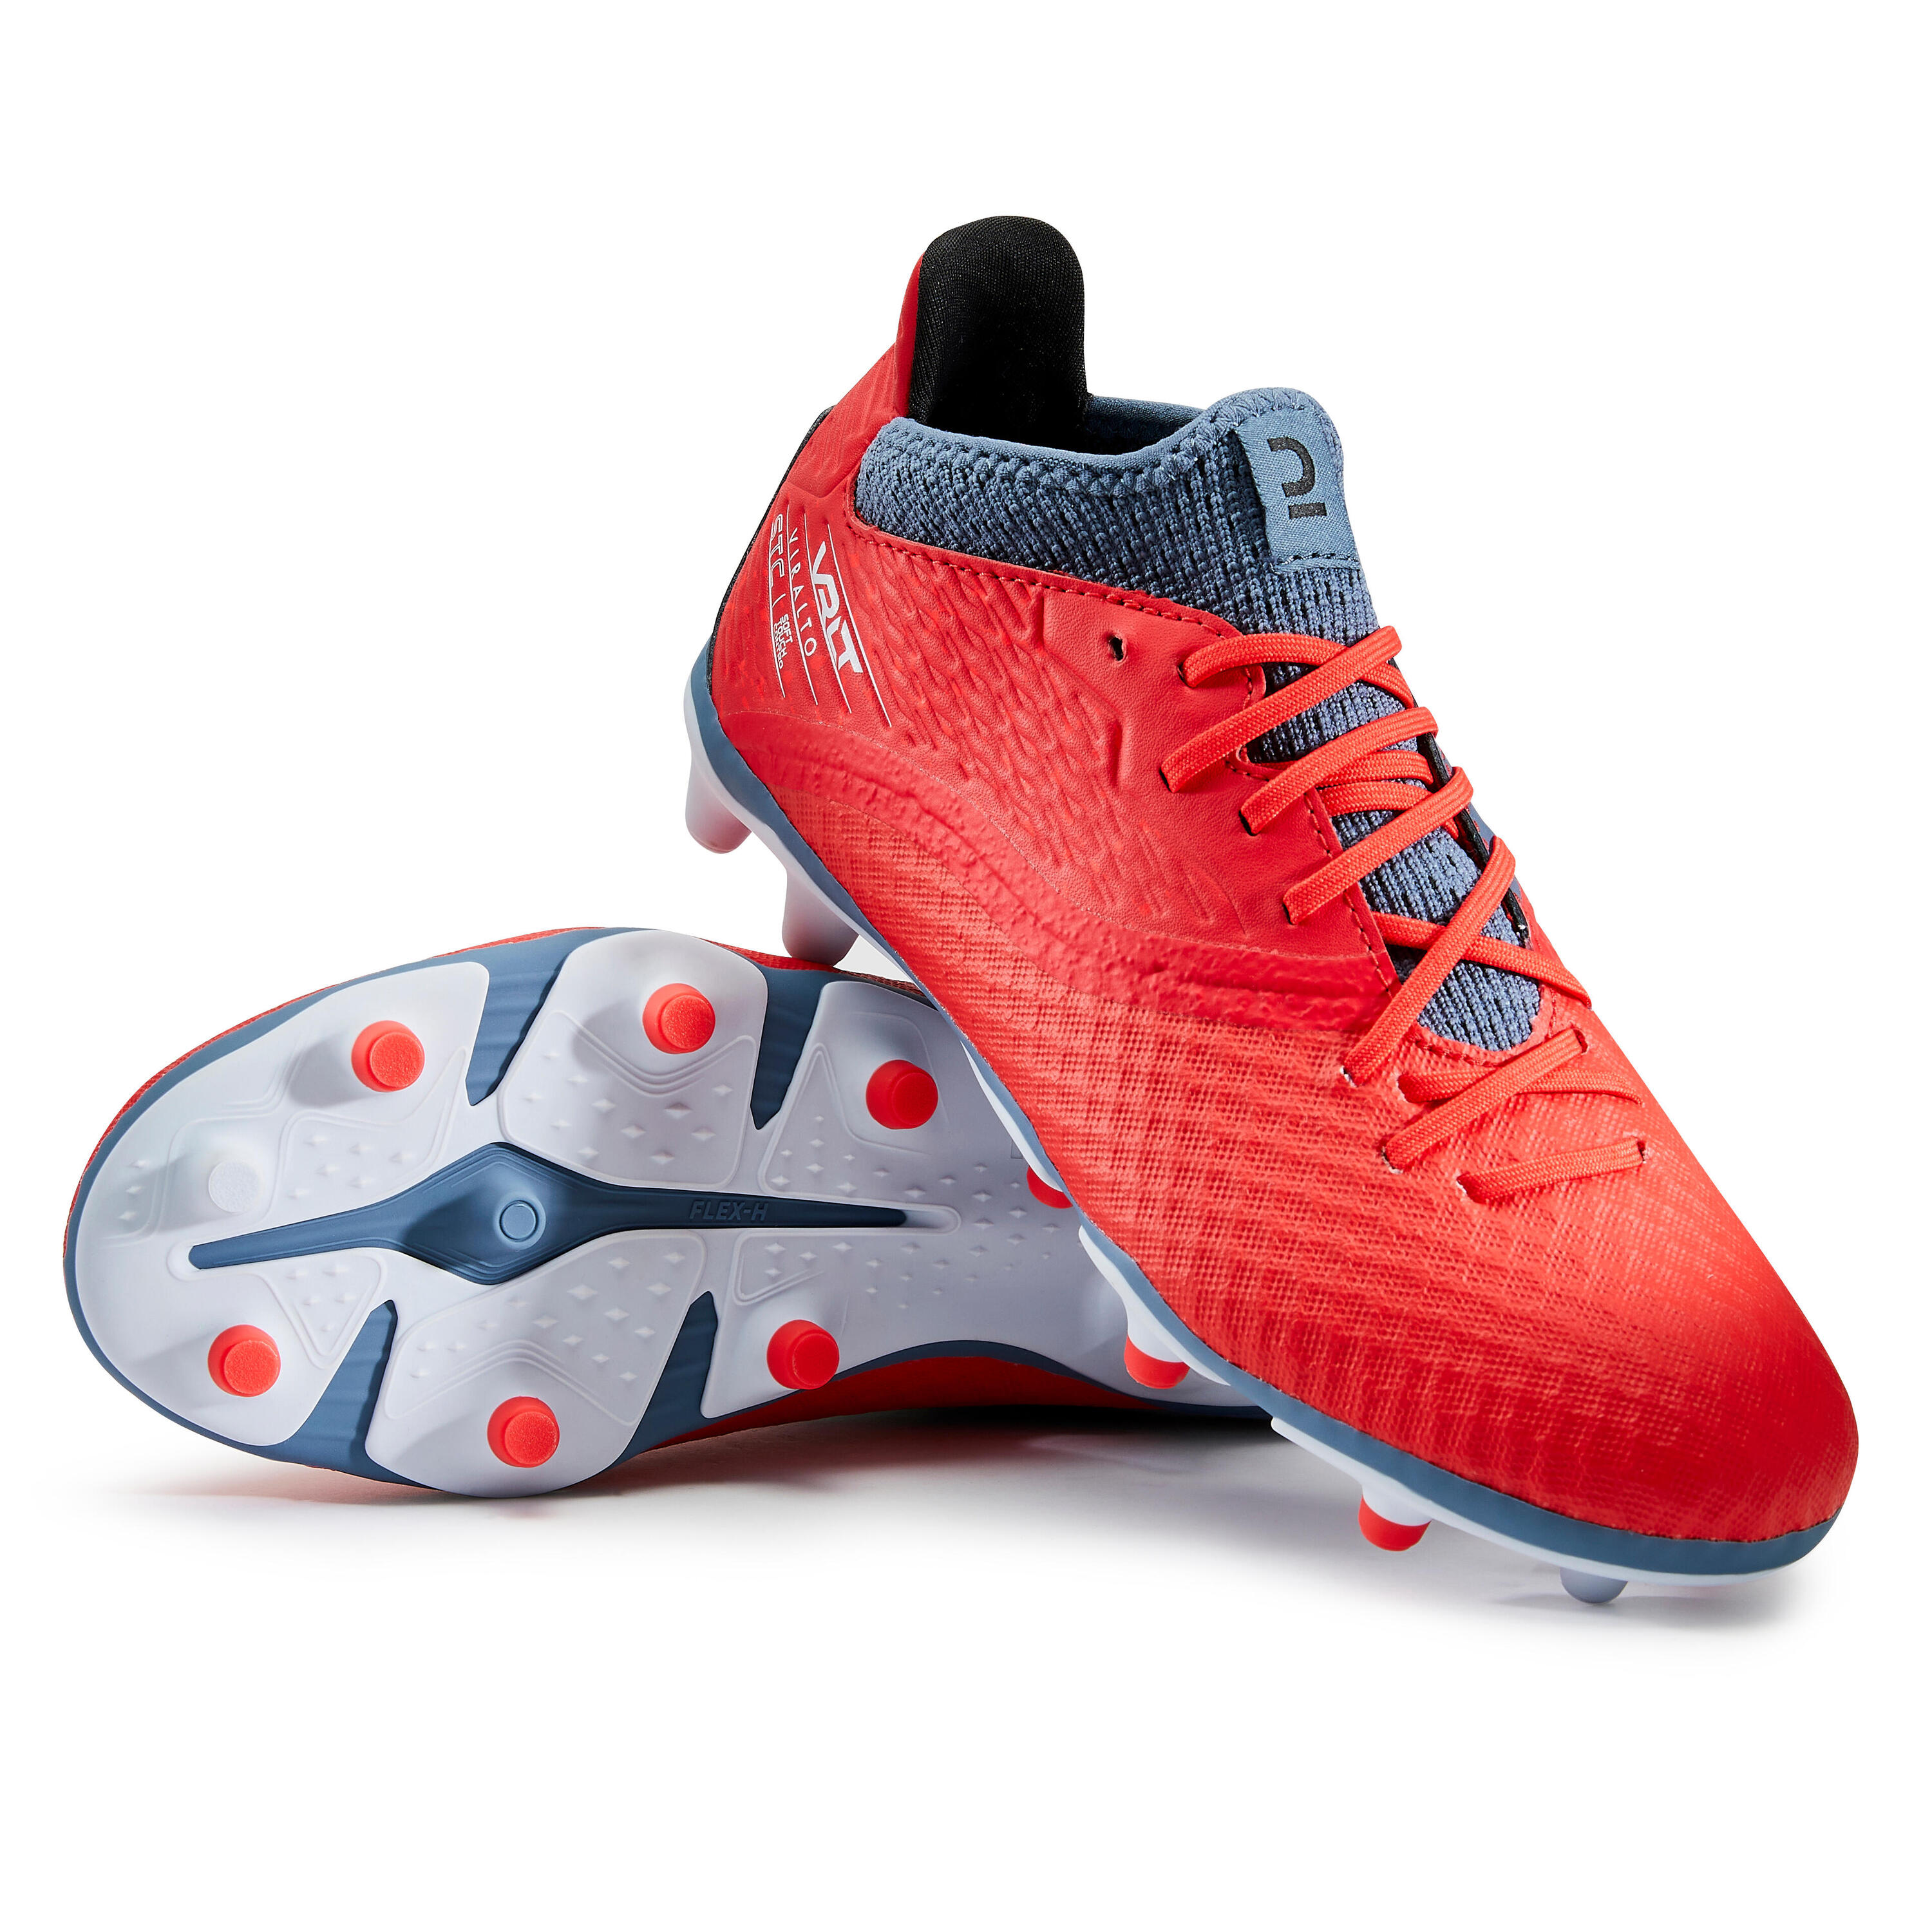 Kids' Lace-Up Football Boots Viralto III FG - Red/Grey 8/11